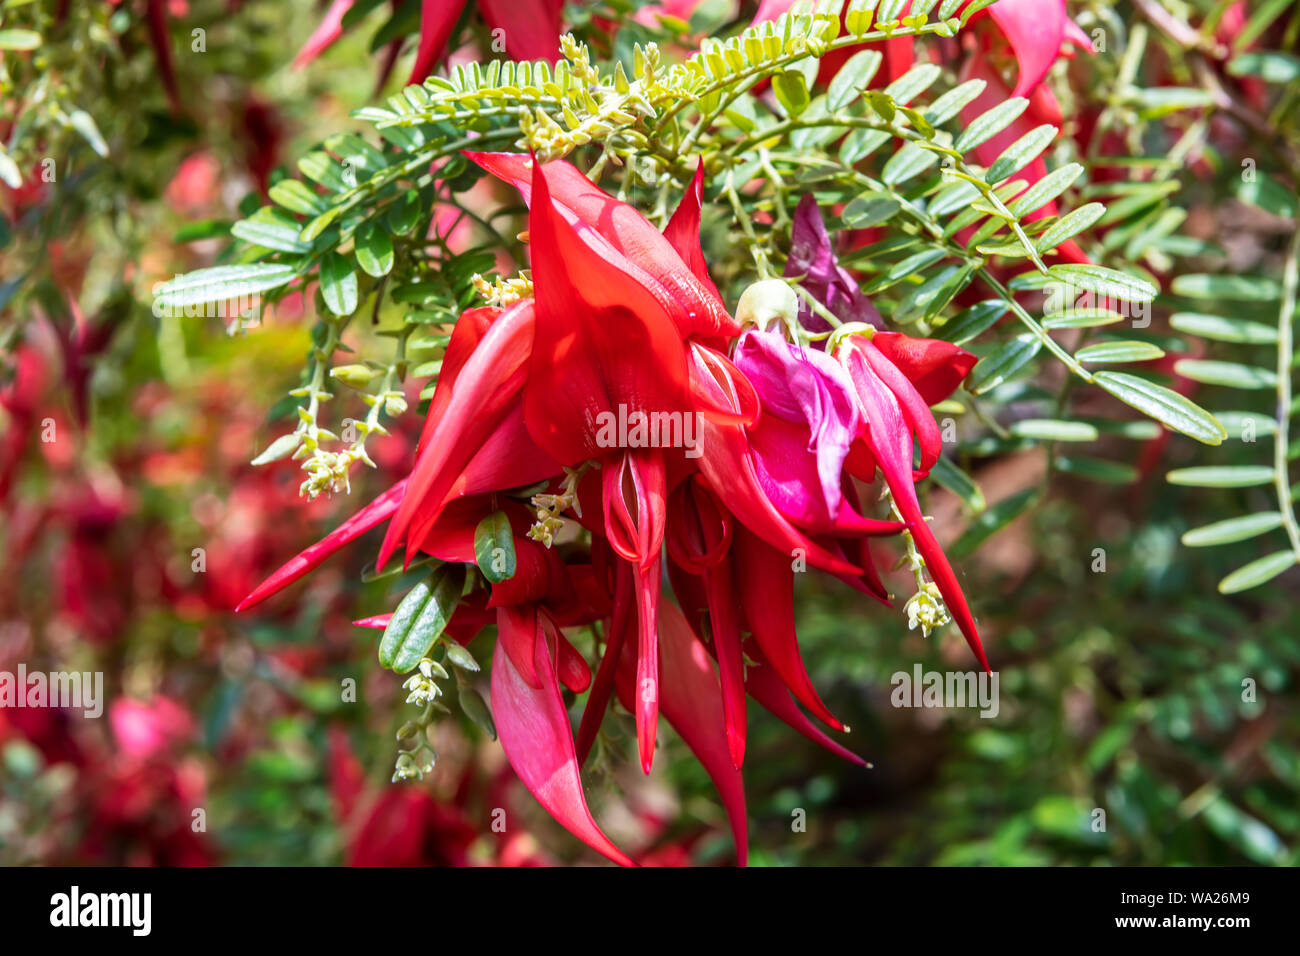 Claw-like red flowers of evergreen shrub of Clianthus Puniceus Roseus or glory pea. Stock Photo